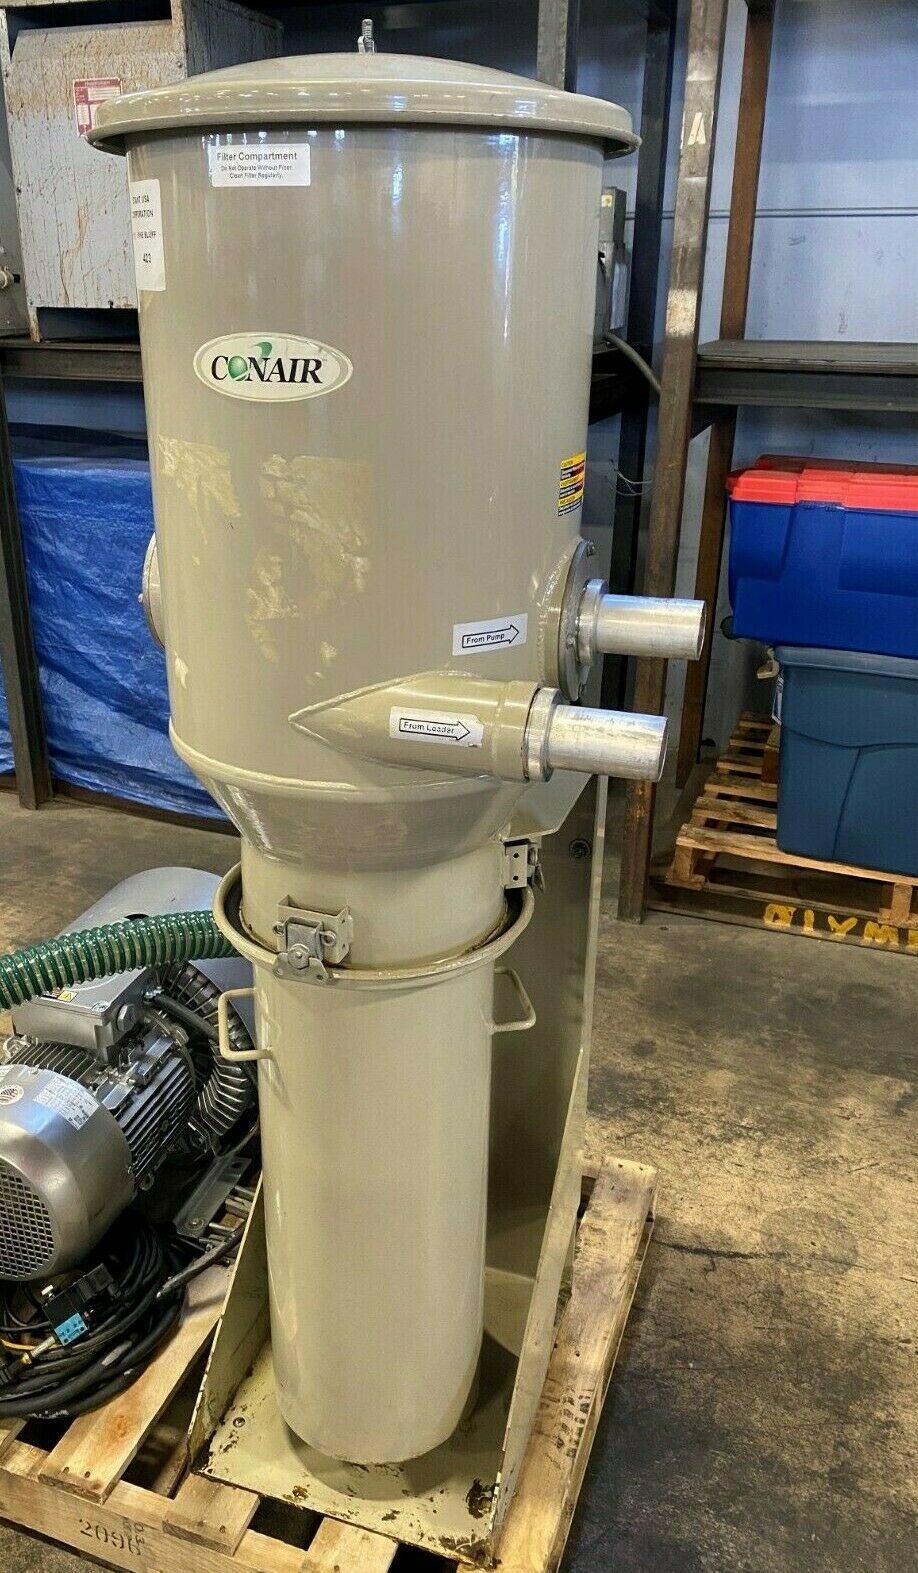 Conair Dc Dust Collector Vacuum System Filter 115 Volt Baan Revision